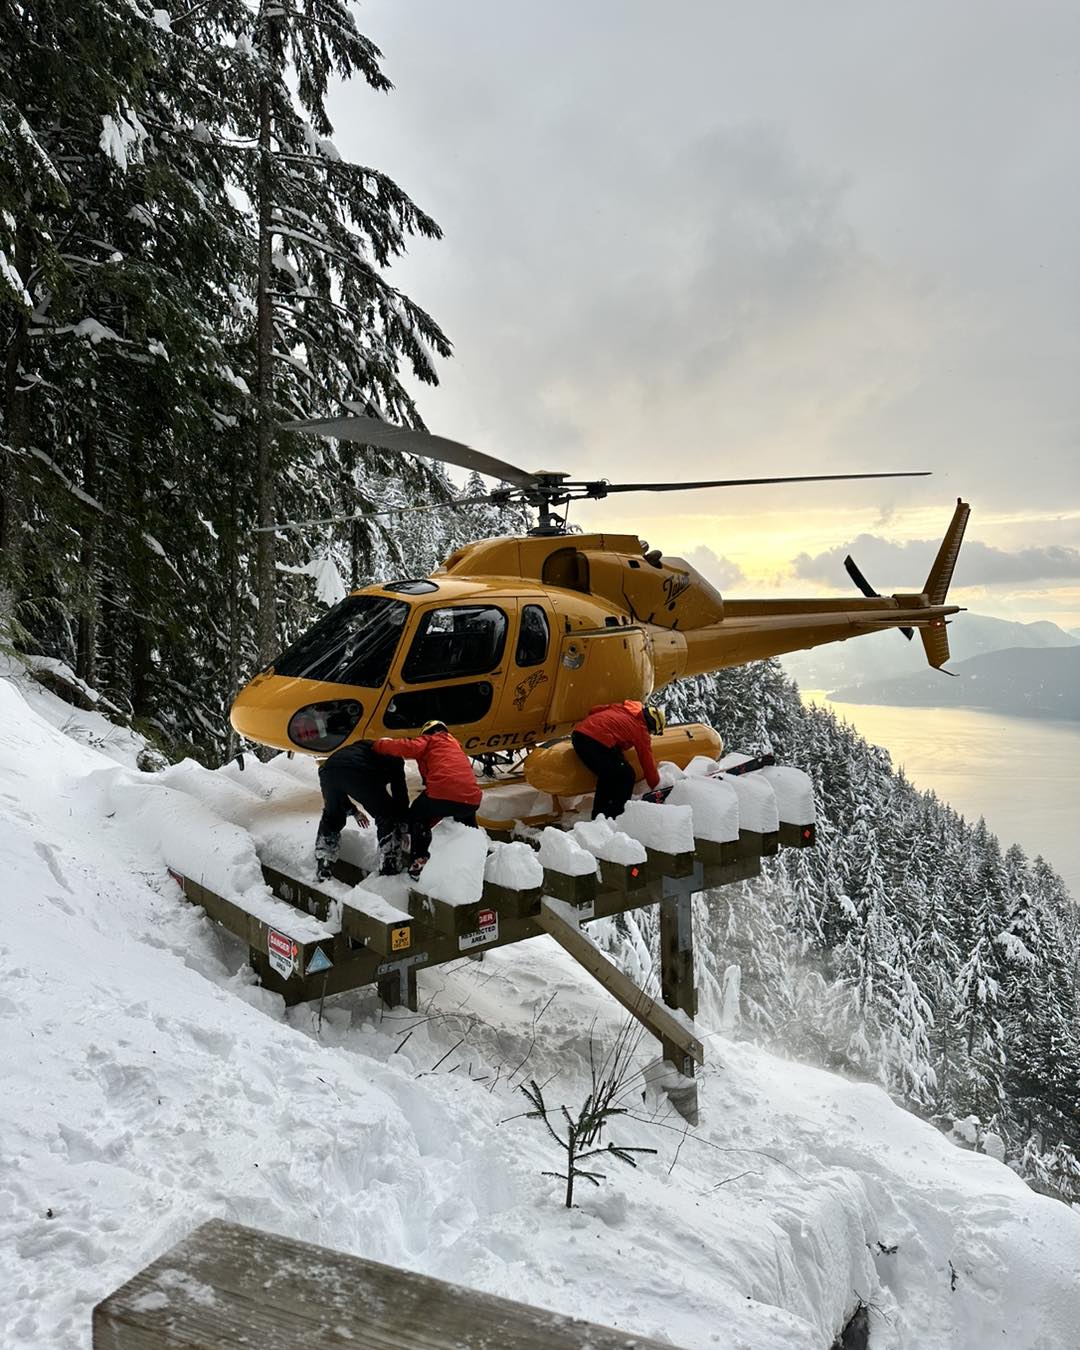 ‘Tom saved a life’: U.K. man’s death on B.C. mountain leaves rescue legacy